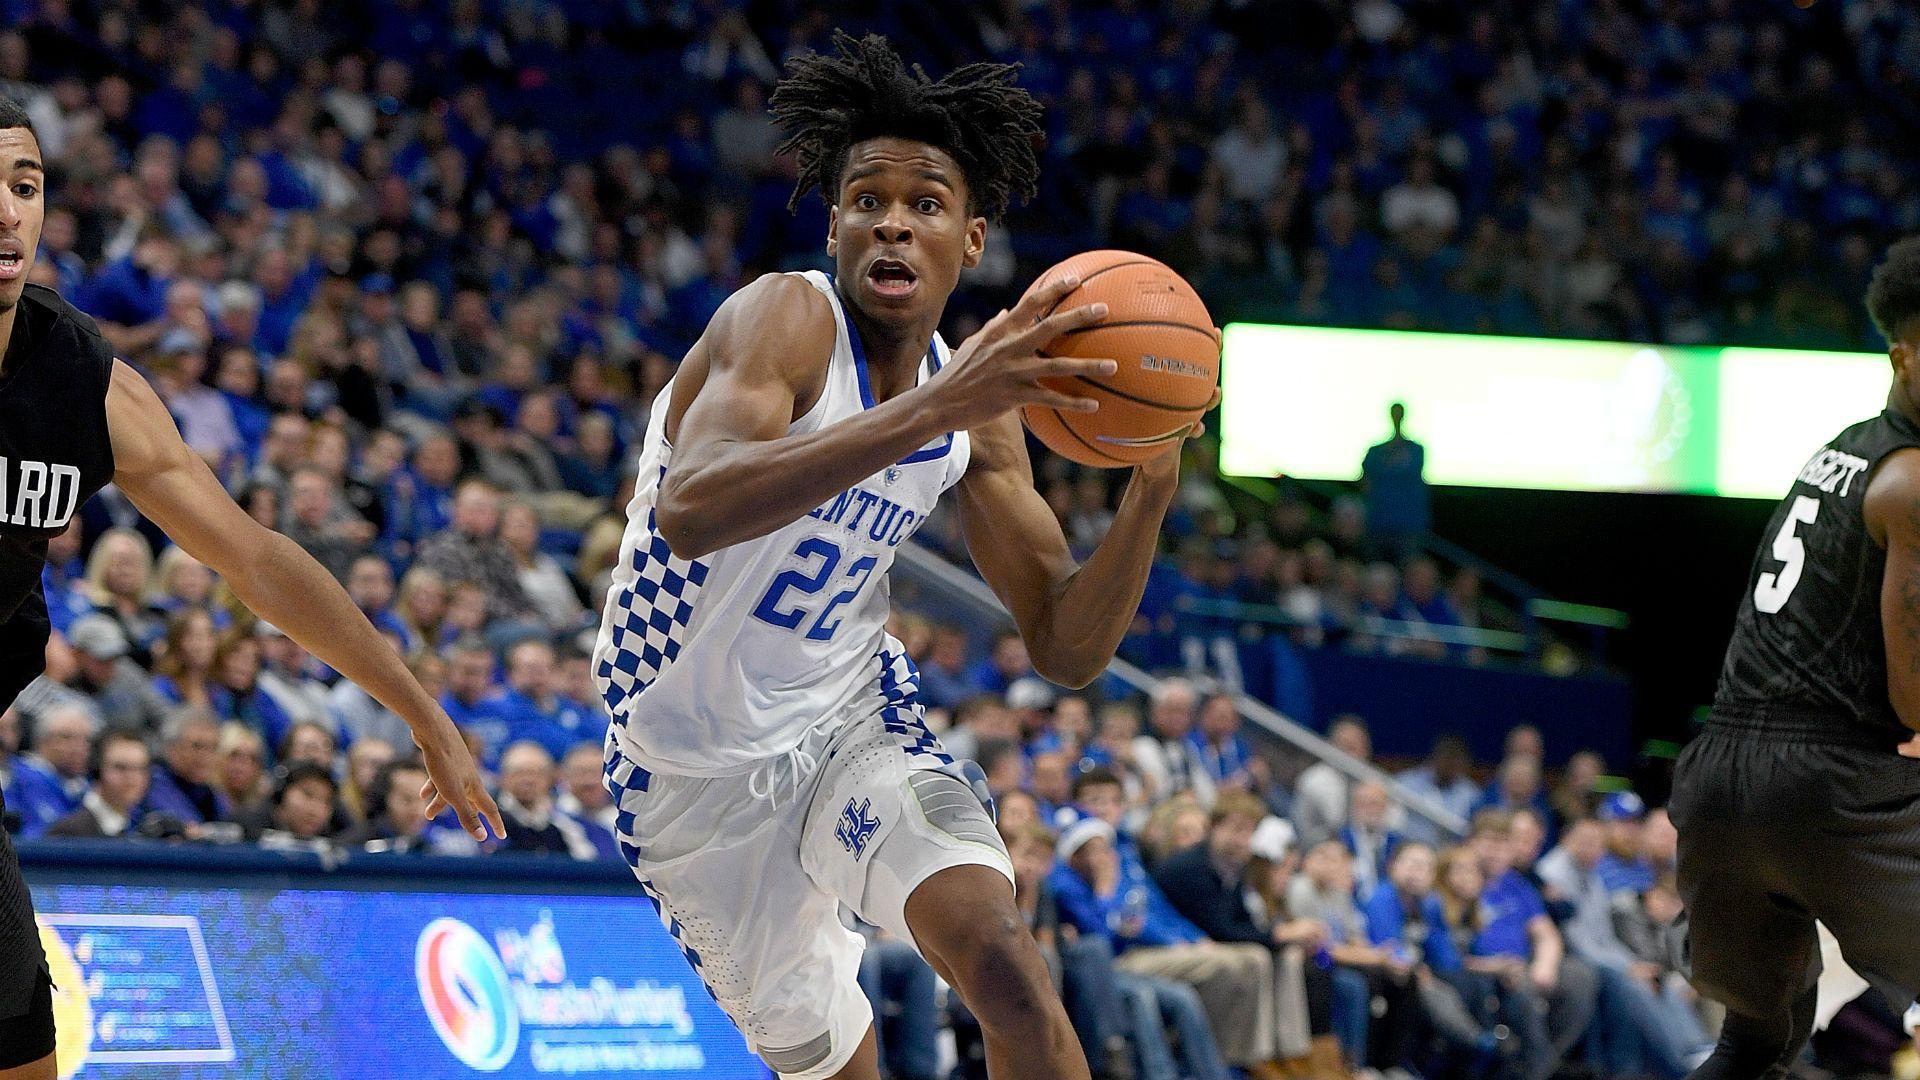 NBA Draft Watch: Why Shai Gilgeous Alexander Could Be Kentucky's Top